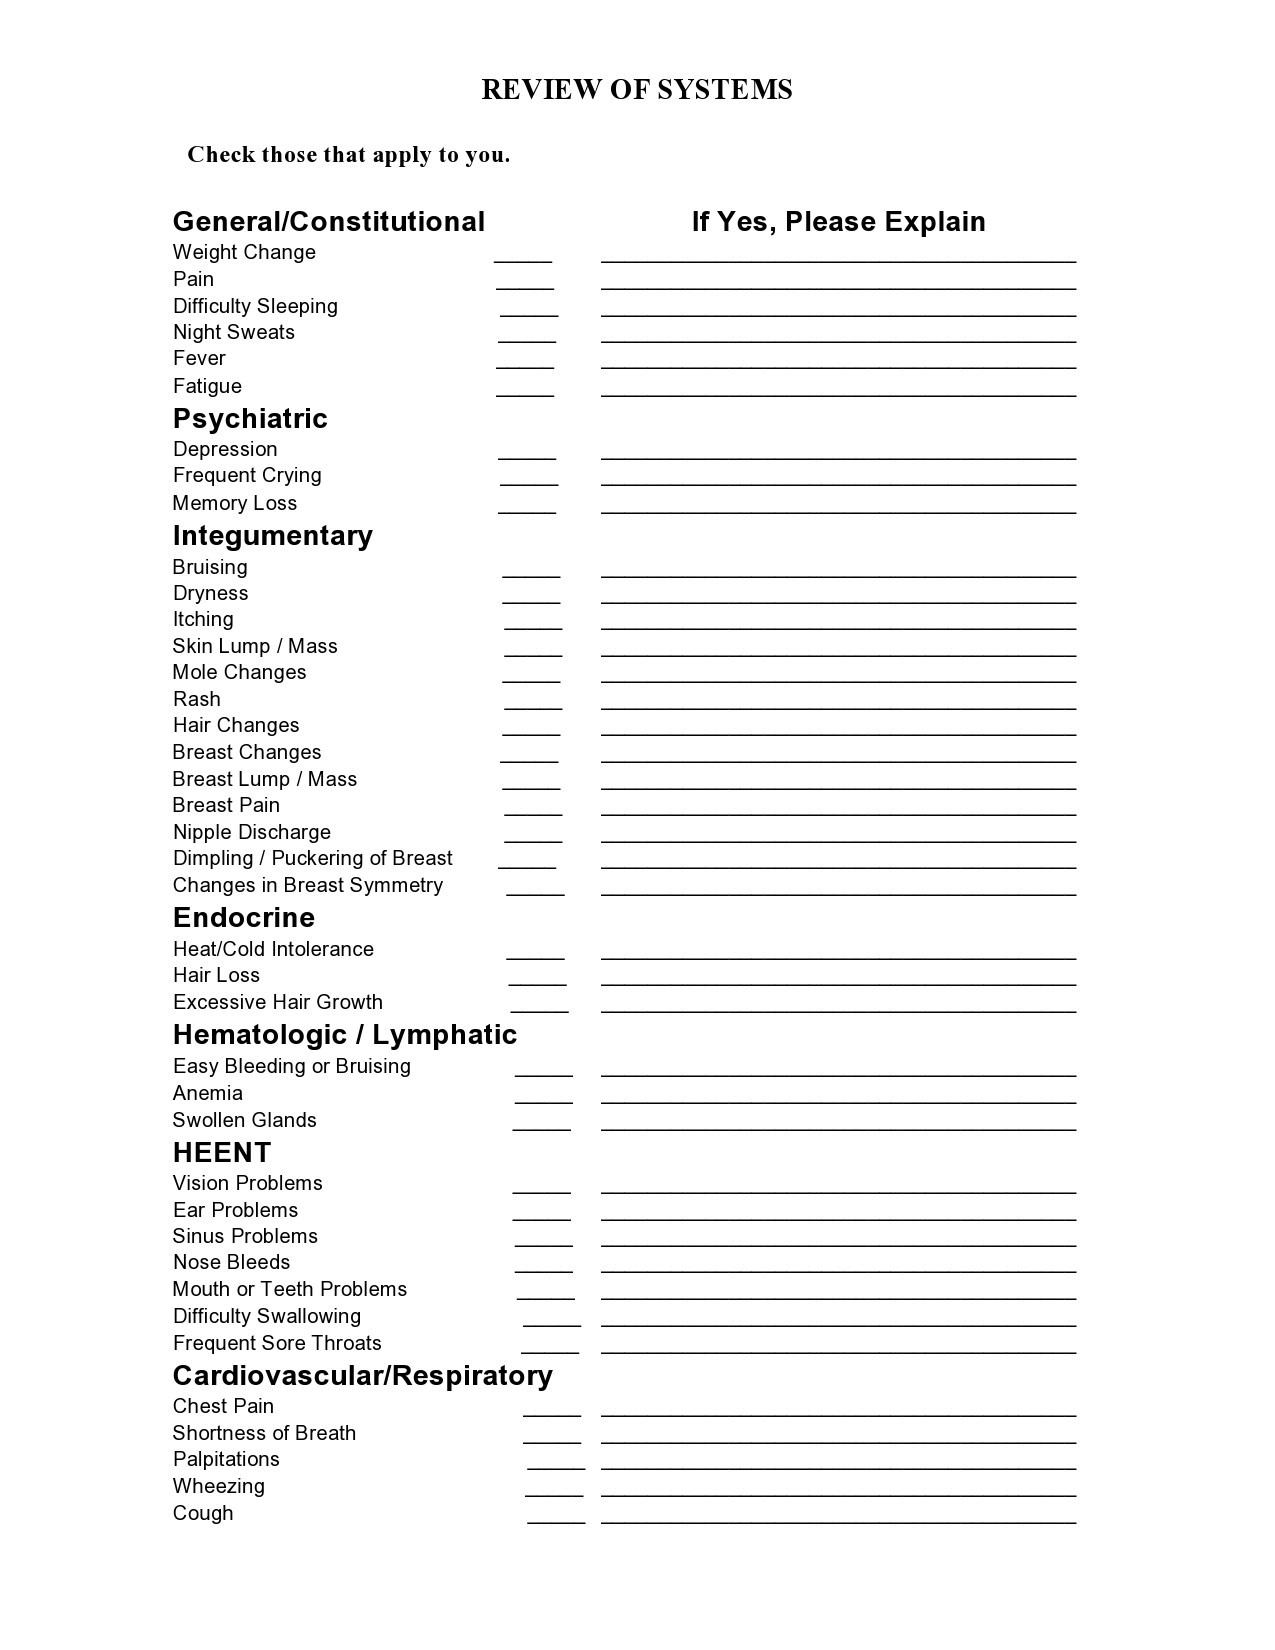 Free review of systems template 34